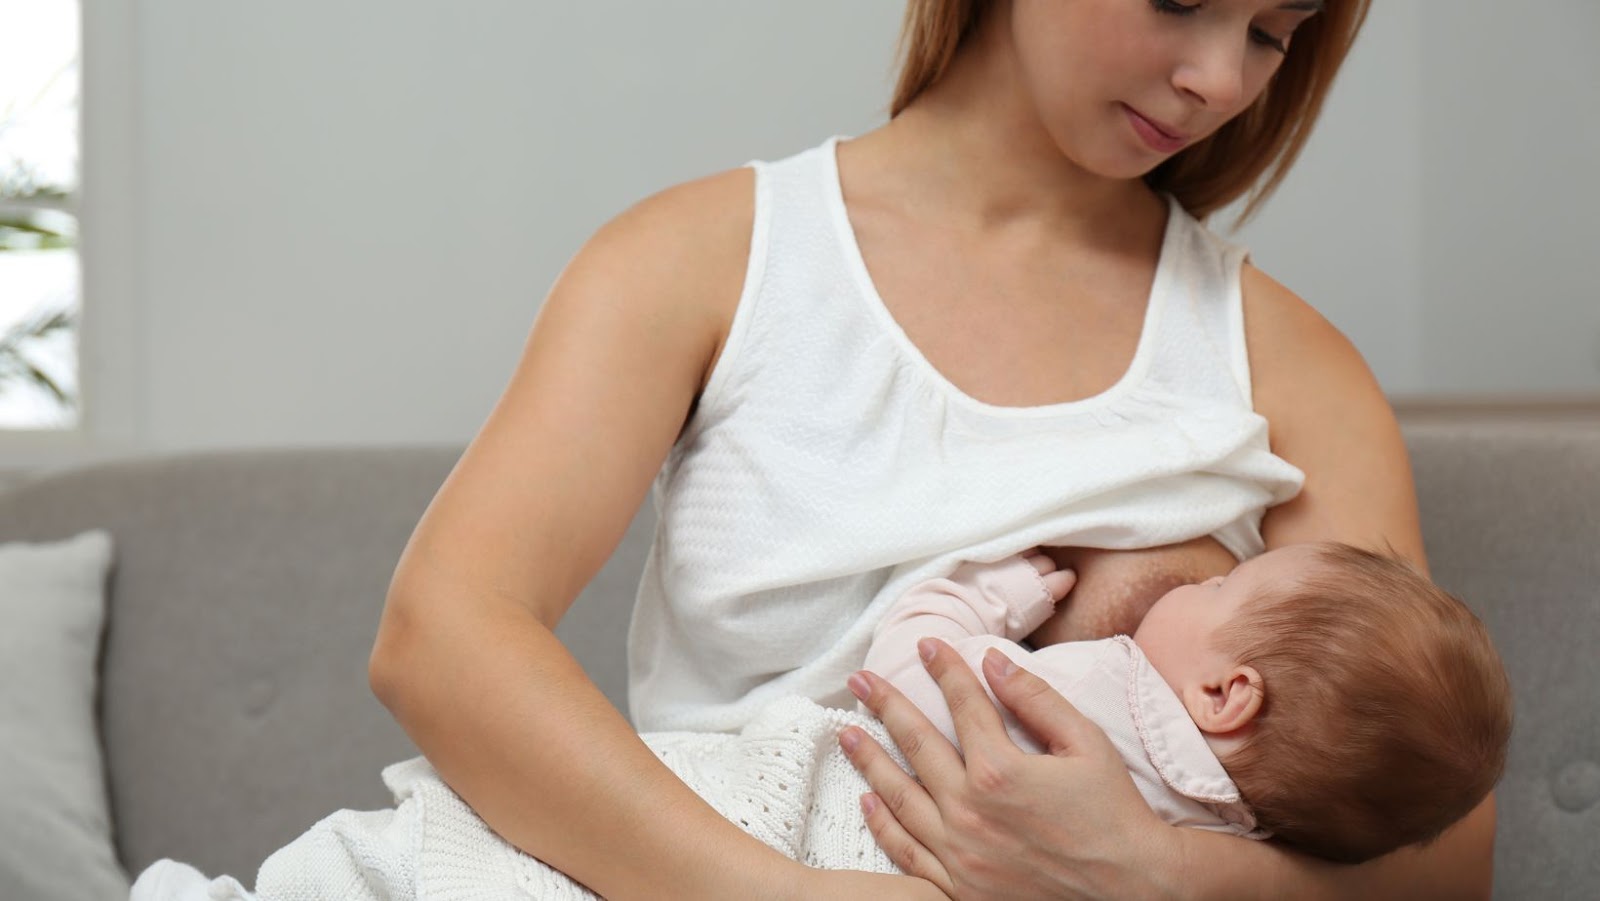 Can You Drink Coffee While Breastfeeding? Surprising Facts You Need to Know